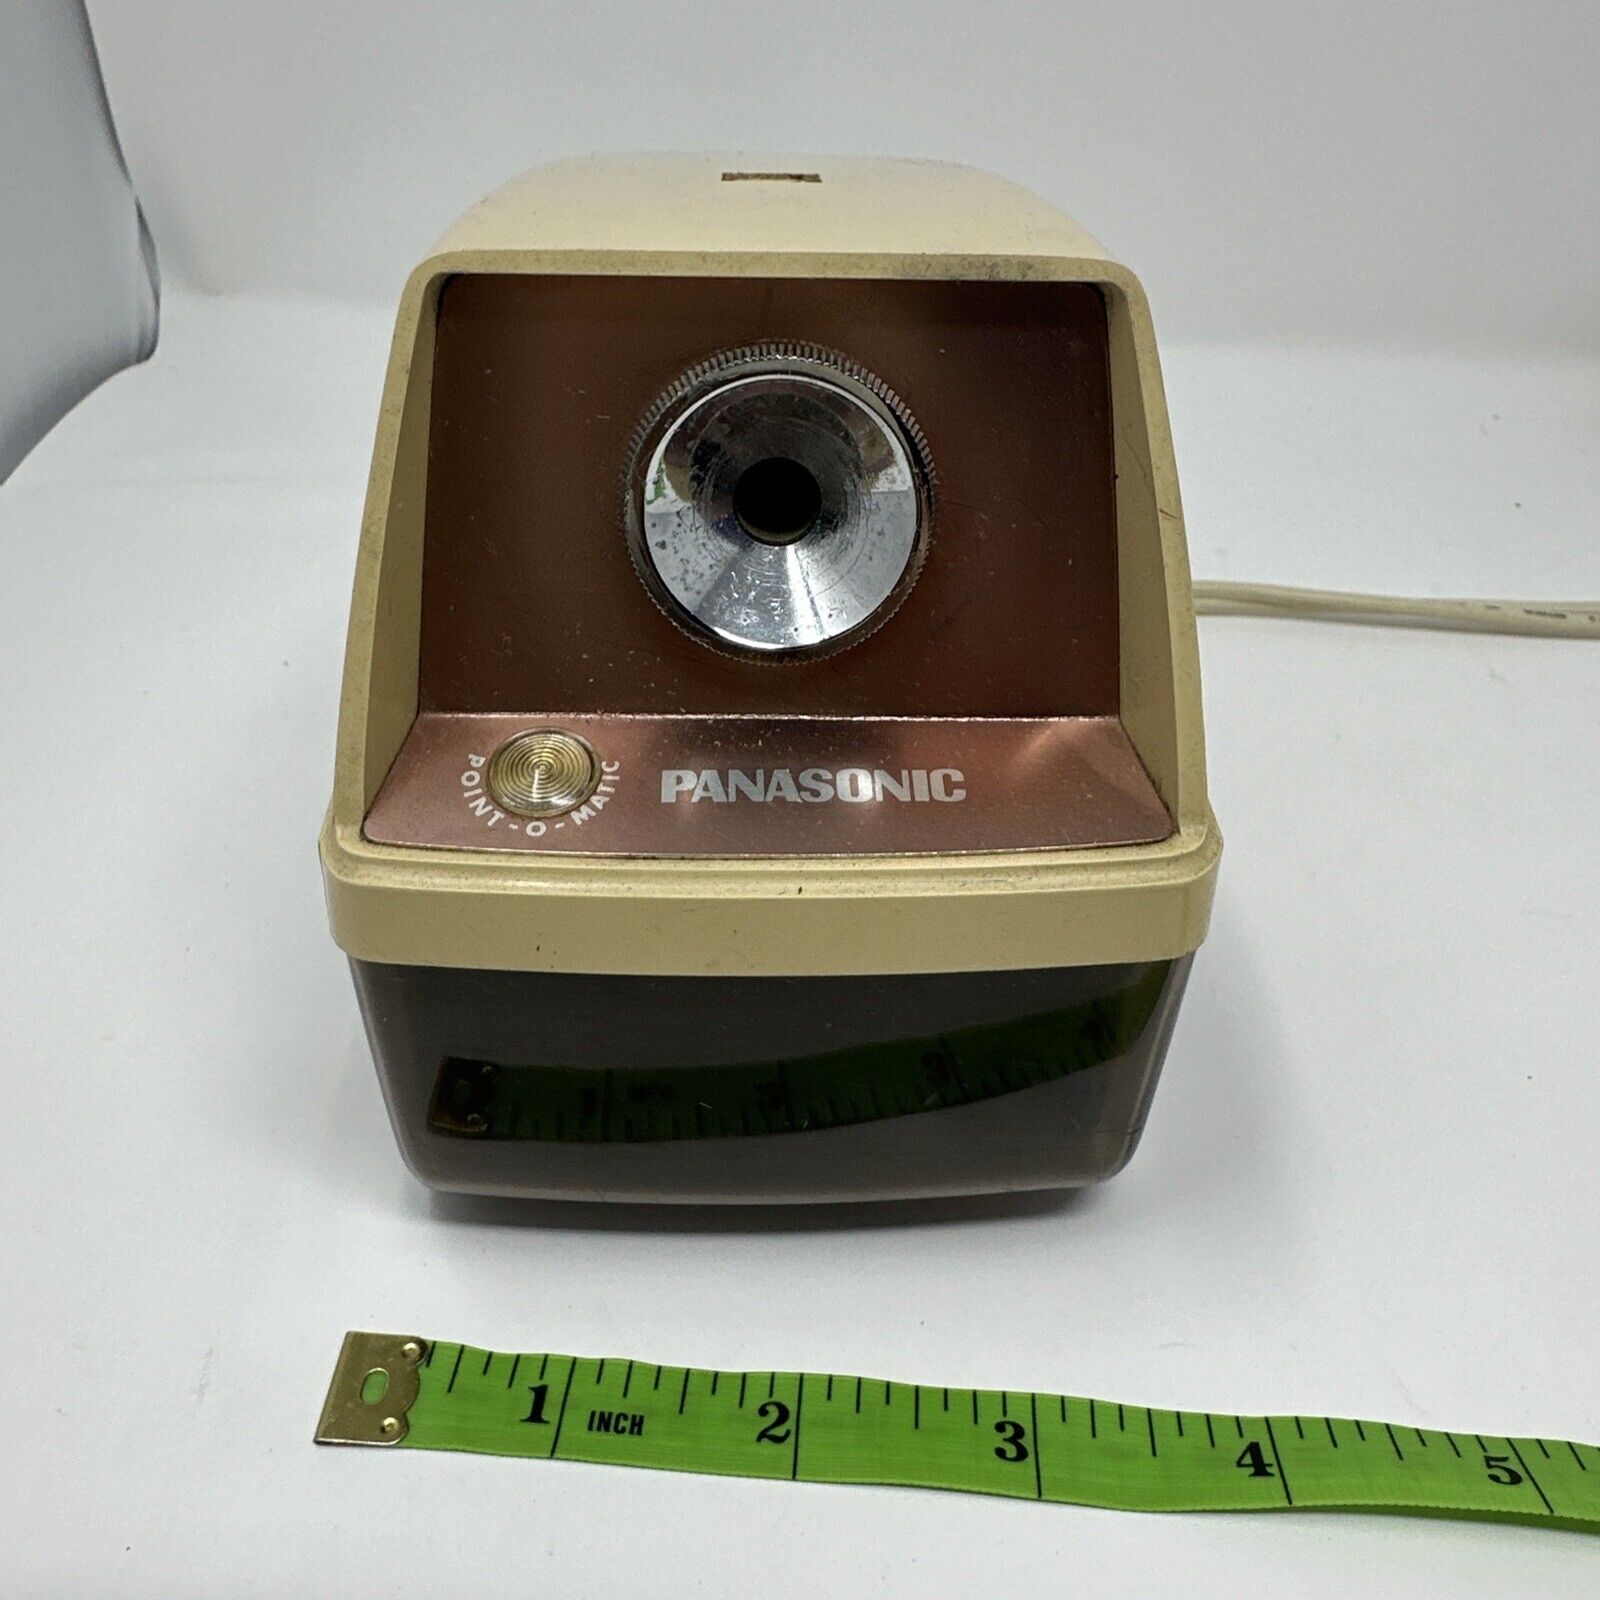 PANASONIC Electric Pencil Sharpener Model No. KP-8A TESTED Made in Japan